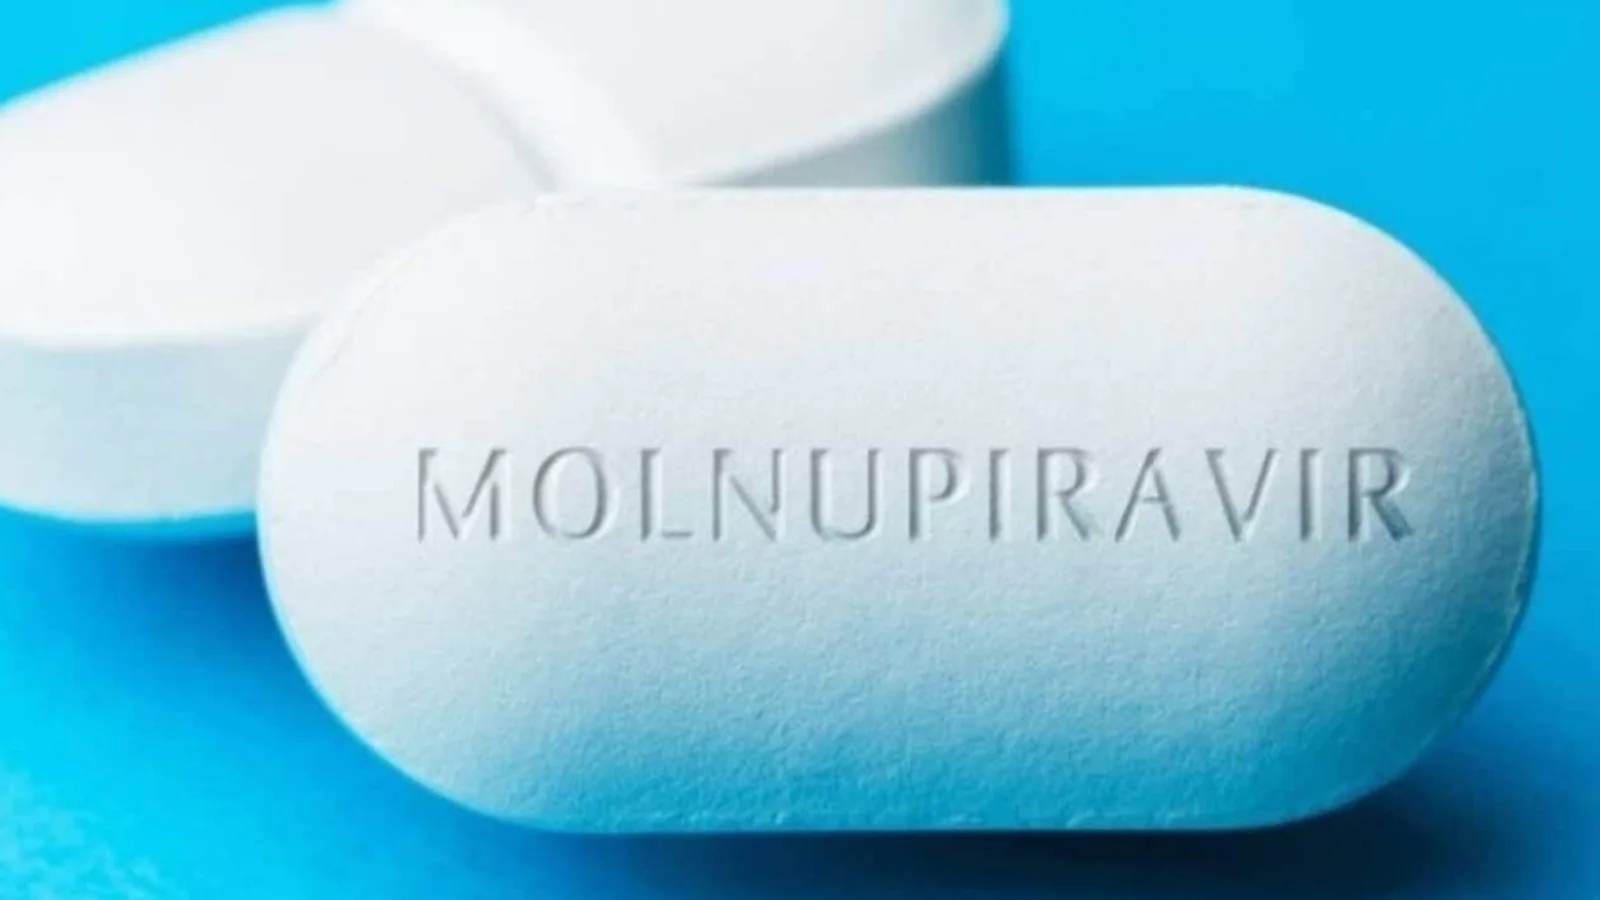 Molnupiravir can be used for high-risk Covid patients: WHO